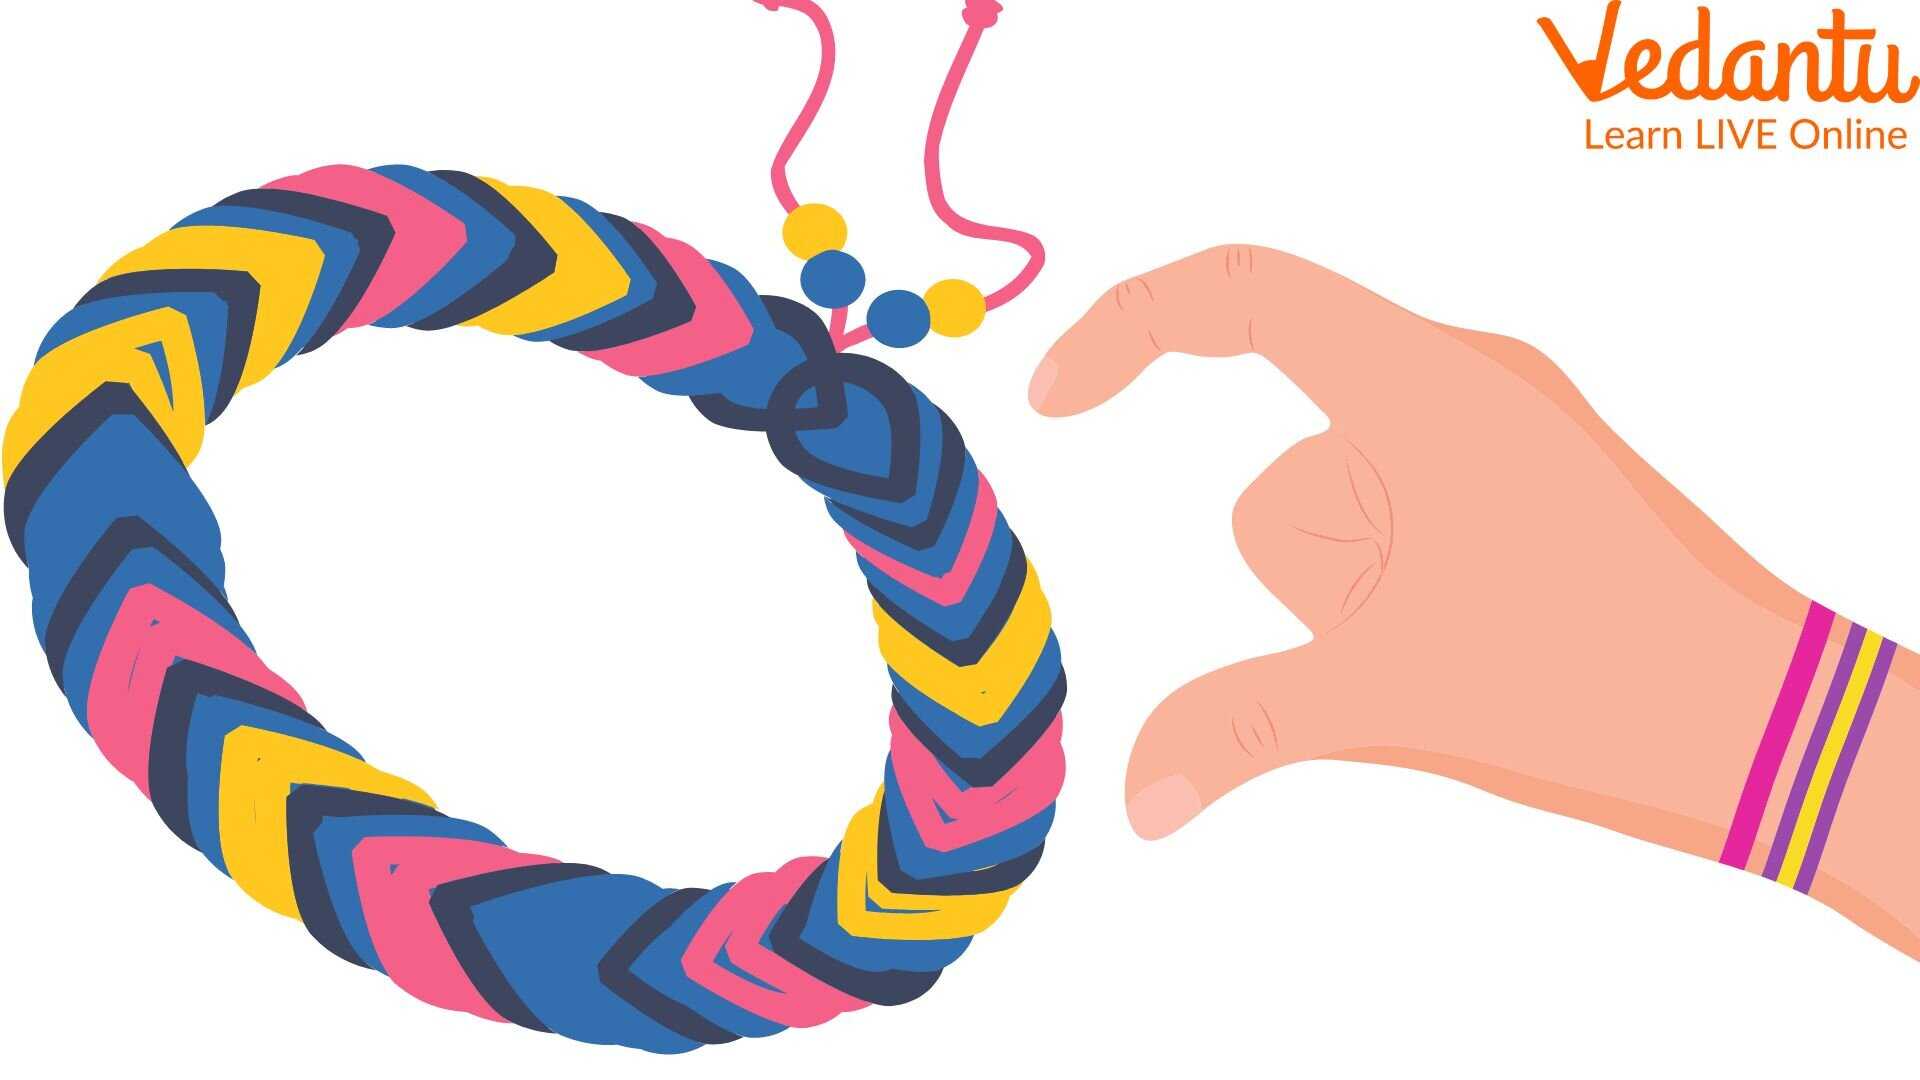 Steps To Make A Diy Friendship Band for Your Friends